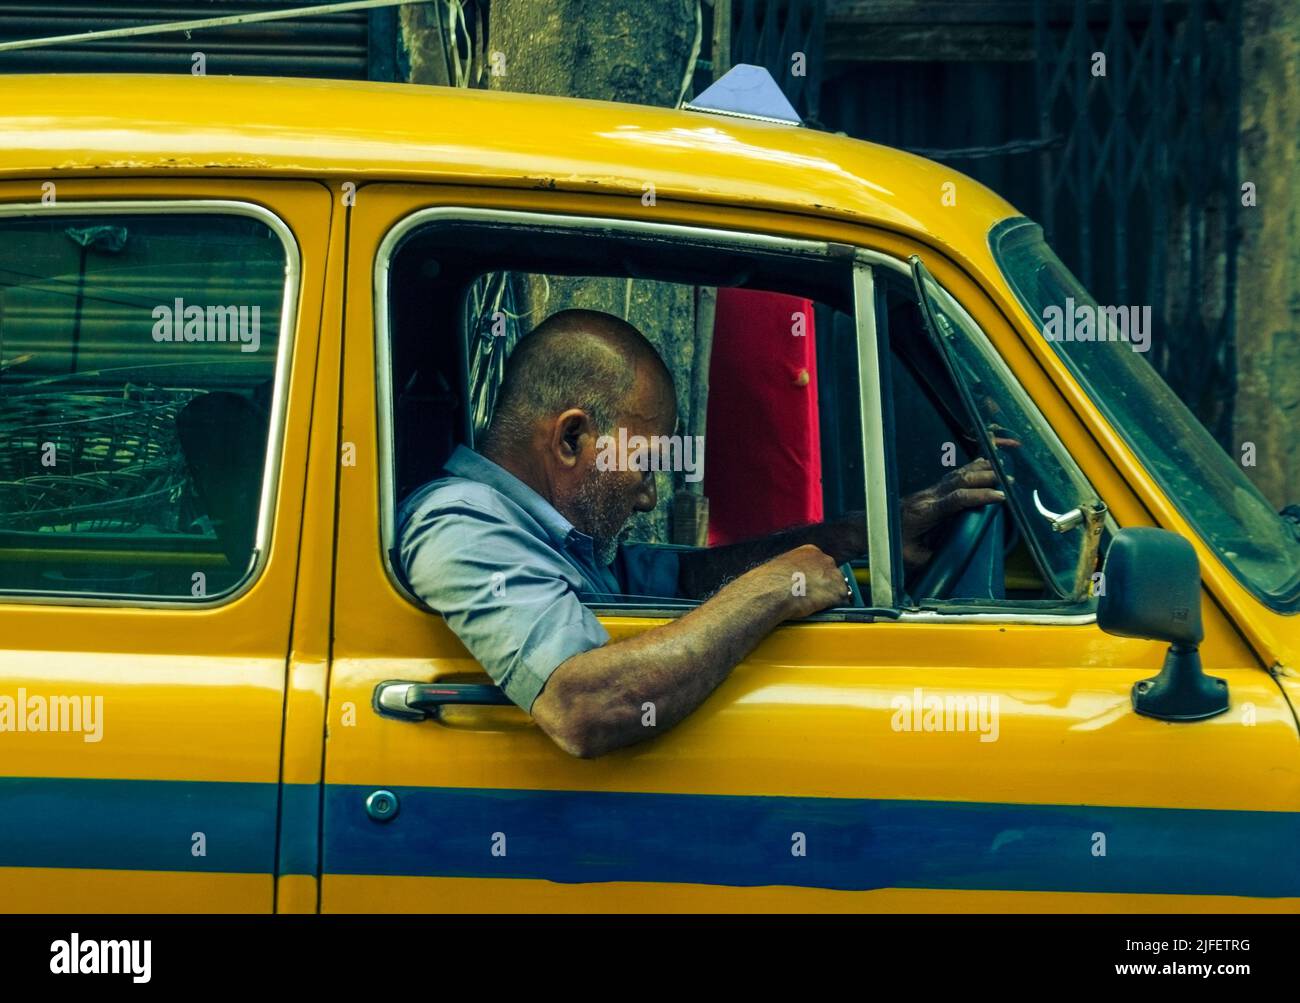 Kolkata, India - 26 June, 2022: A man sitting inside the iconic yellow taxi of Kolkata with a disappointed expression. Selective Focus. Stock Photo